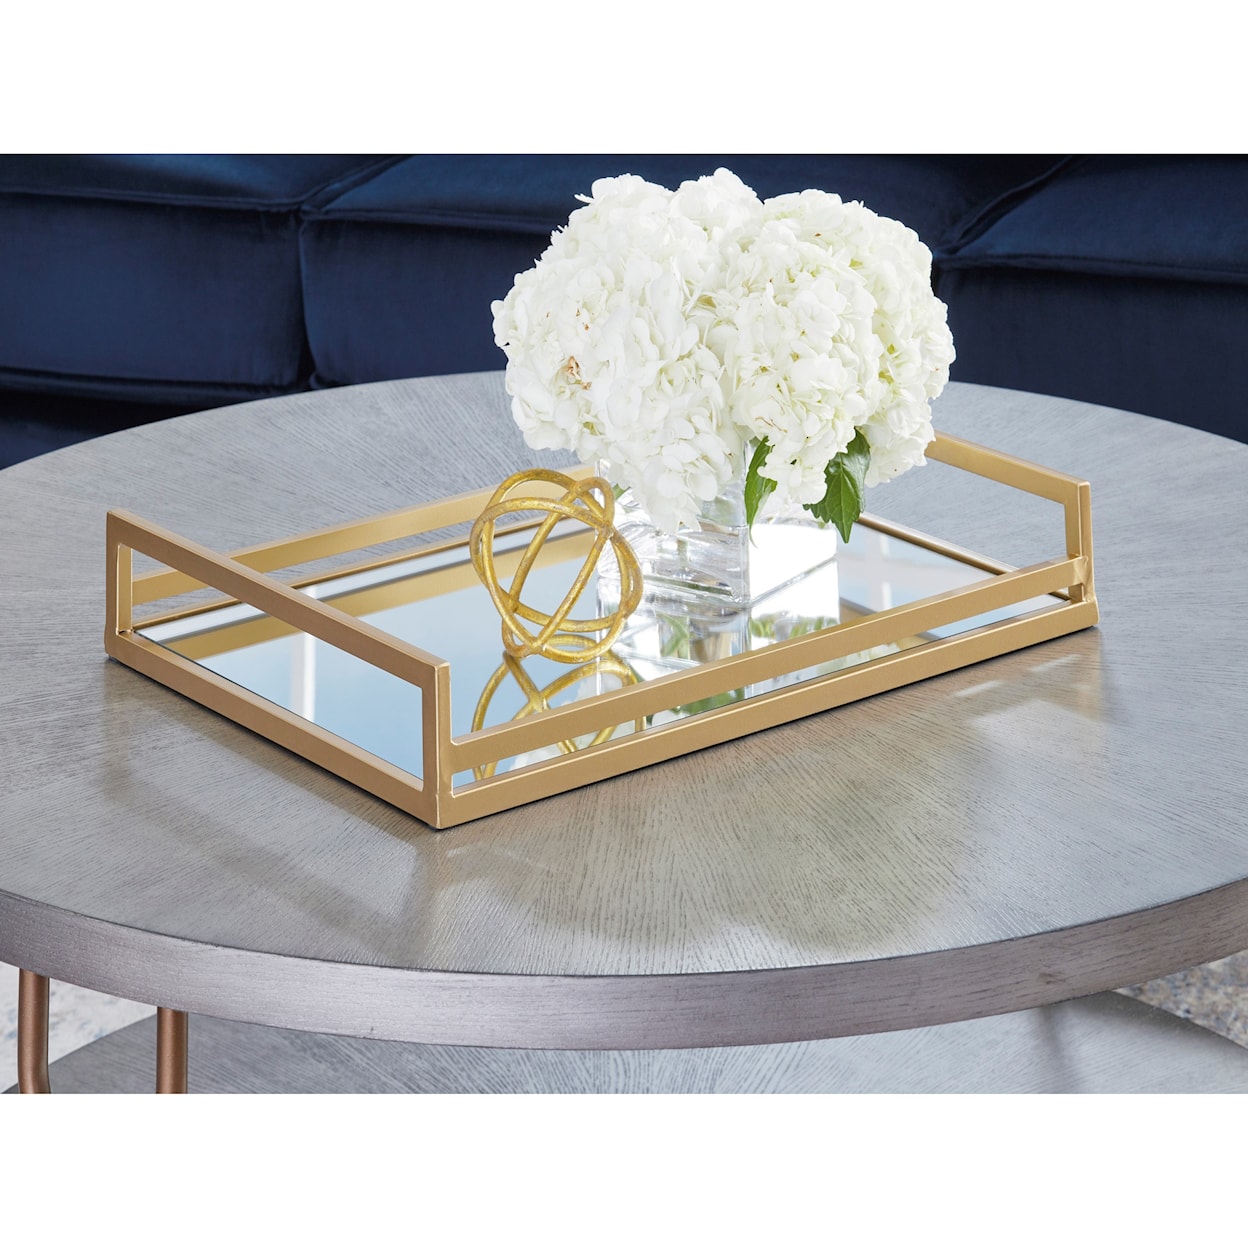 Signature Design by Ashley Accents Derex Gold Finish Tray